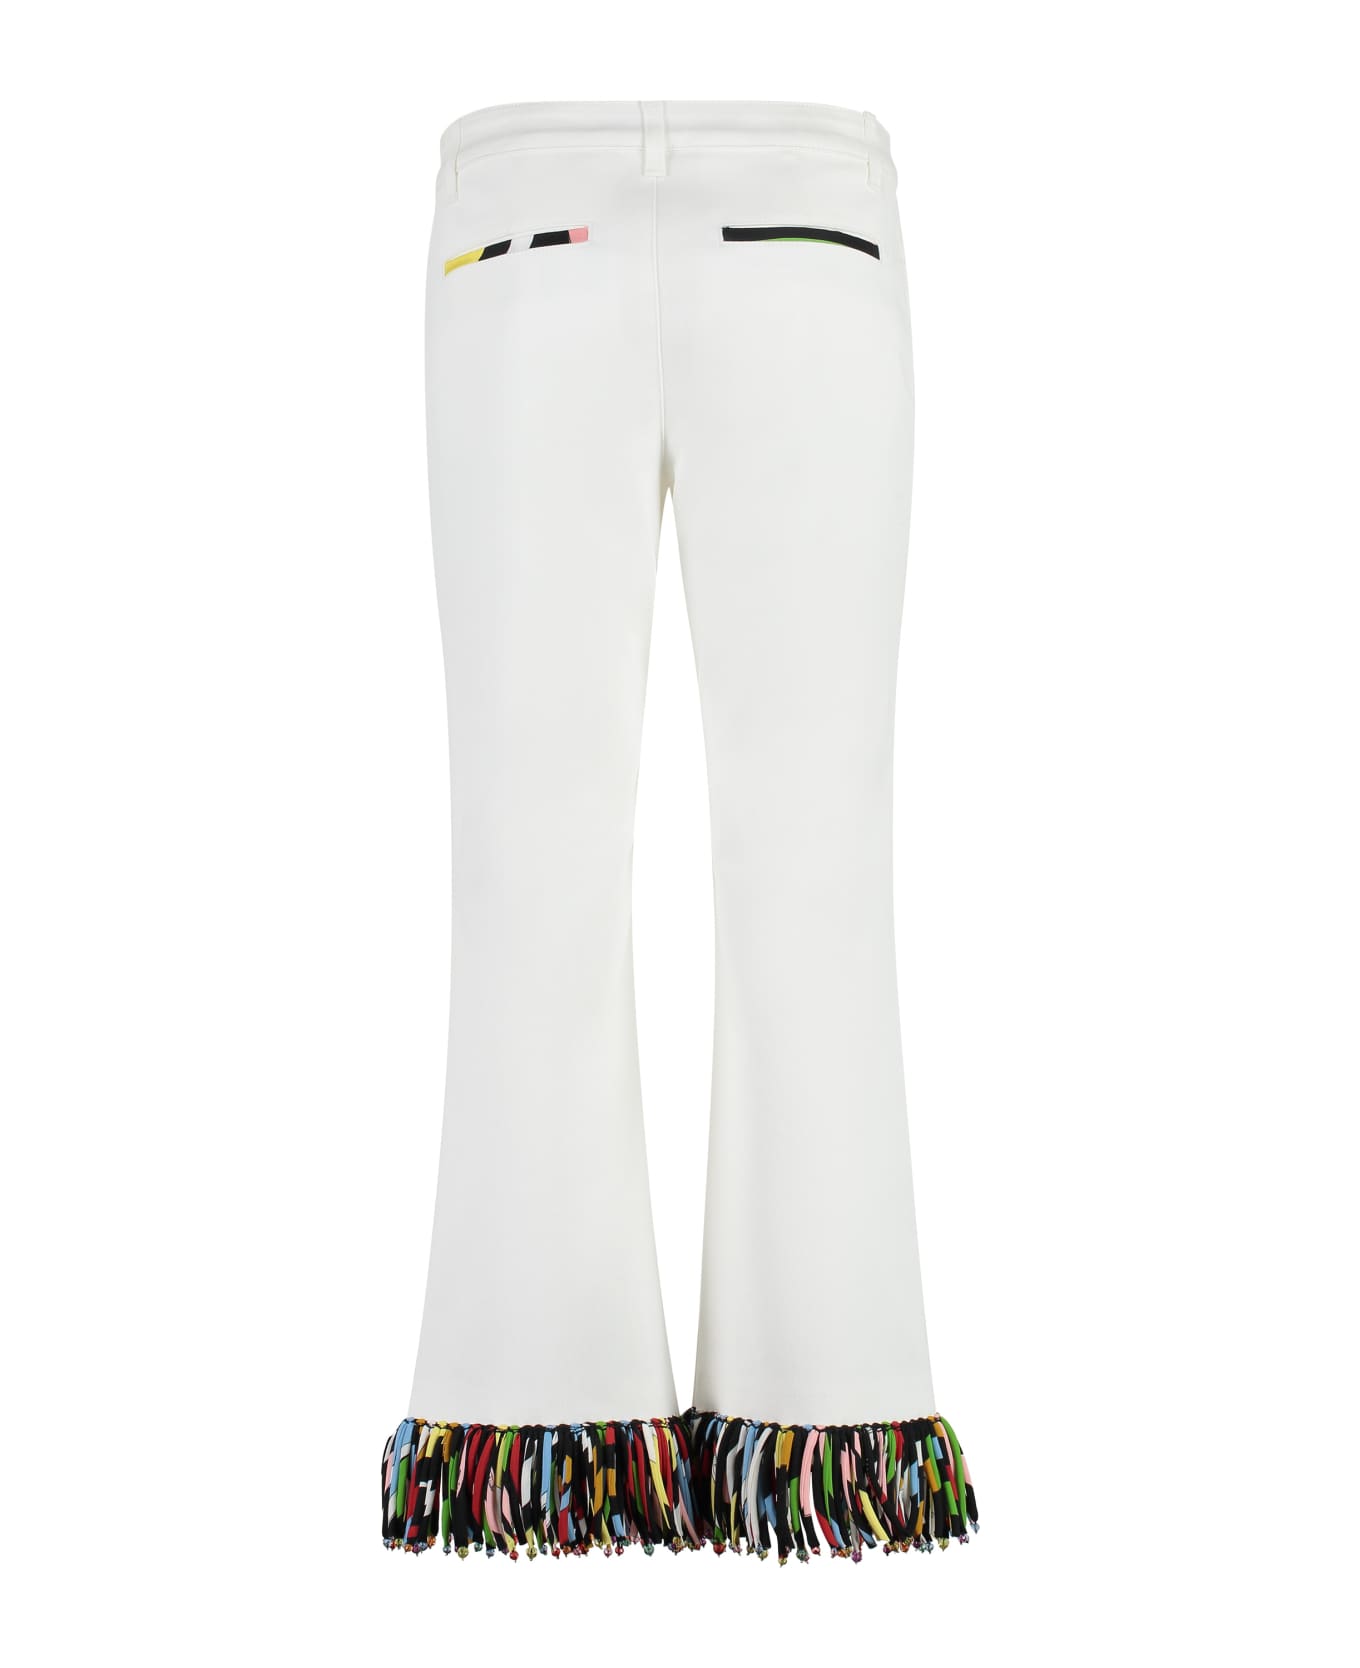 Pucci Cropped Flared Trousers - White ボトムス